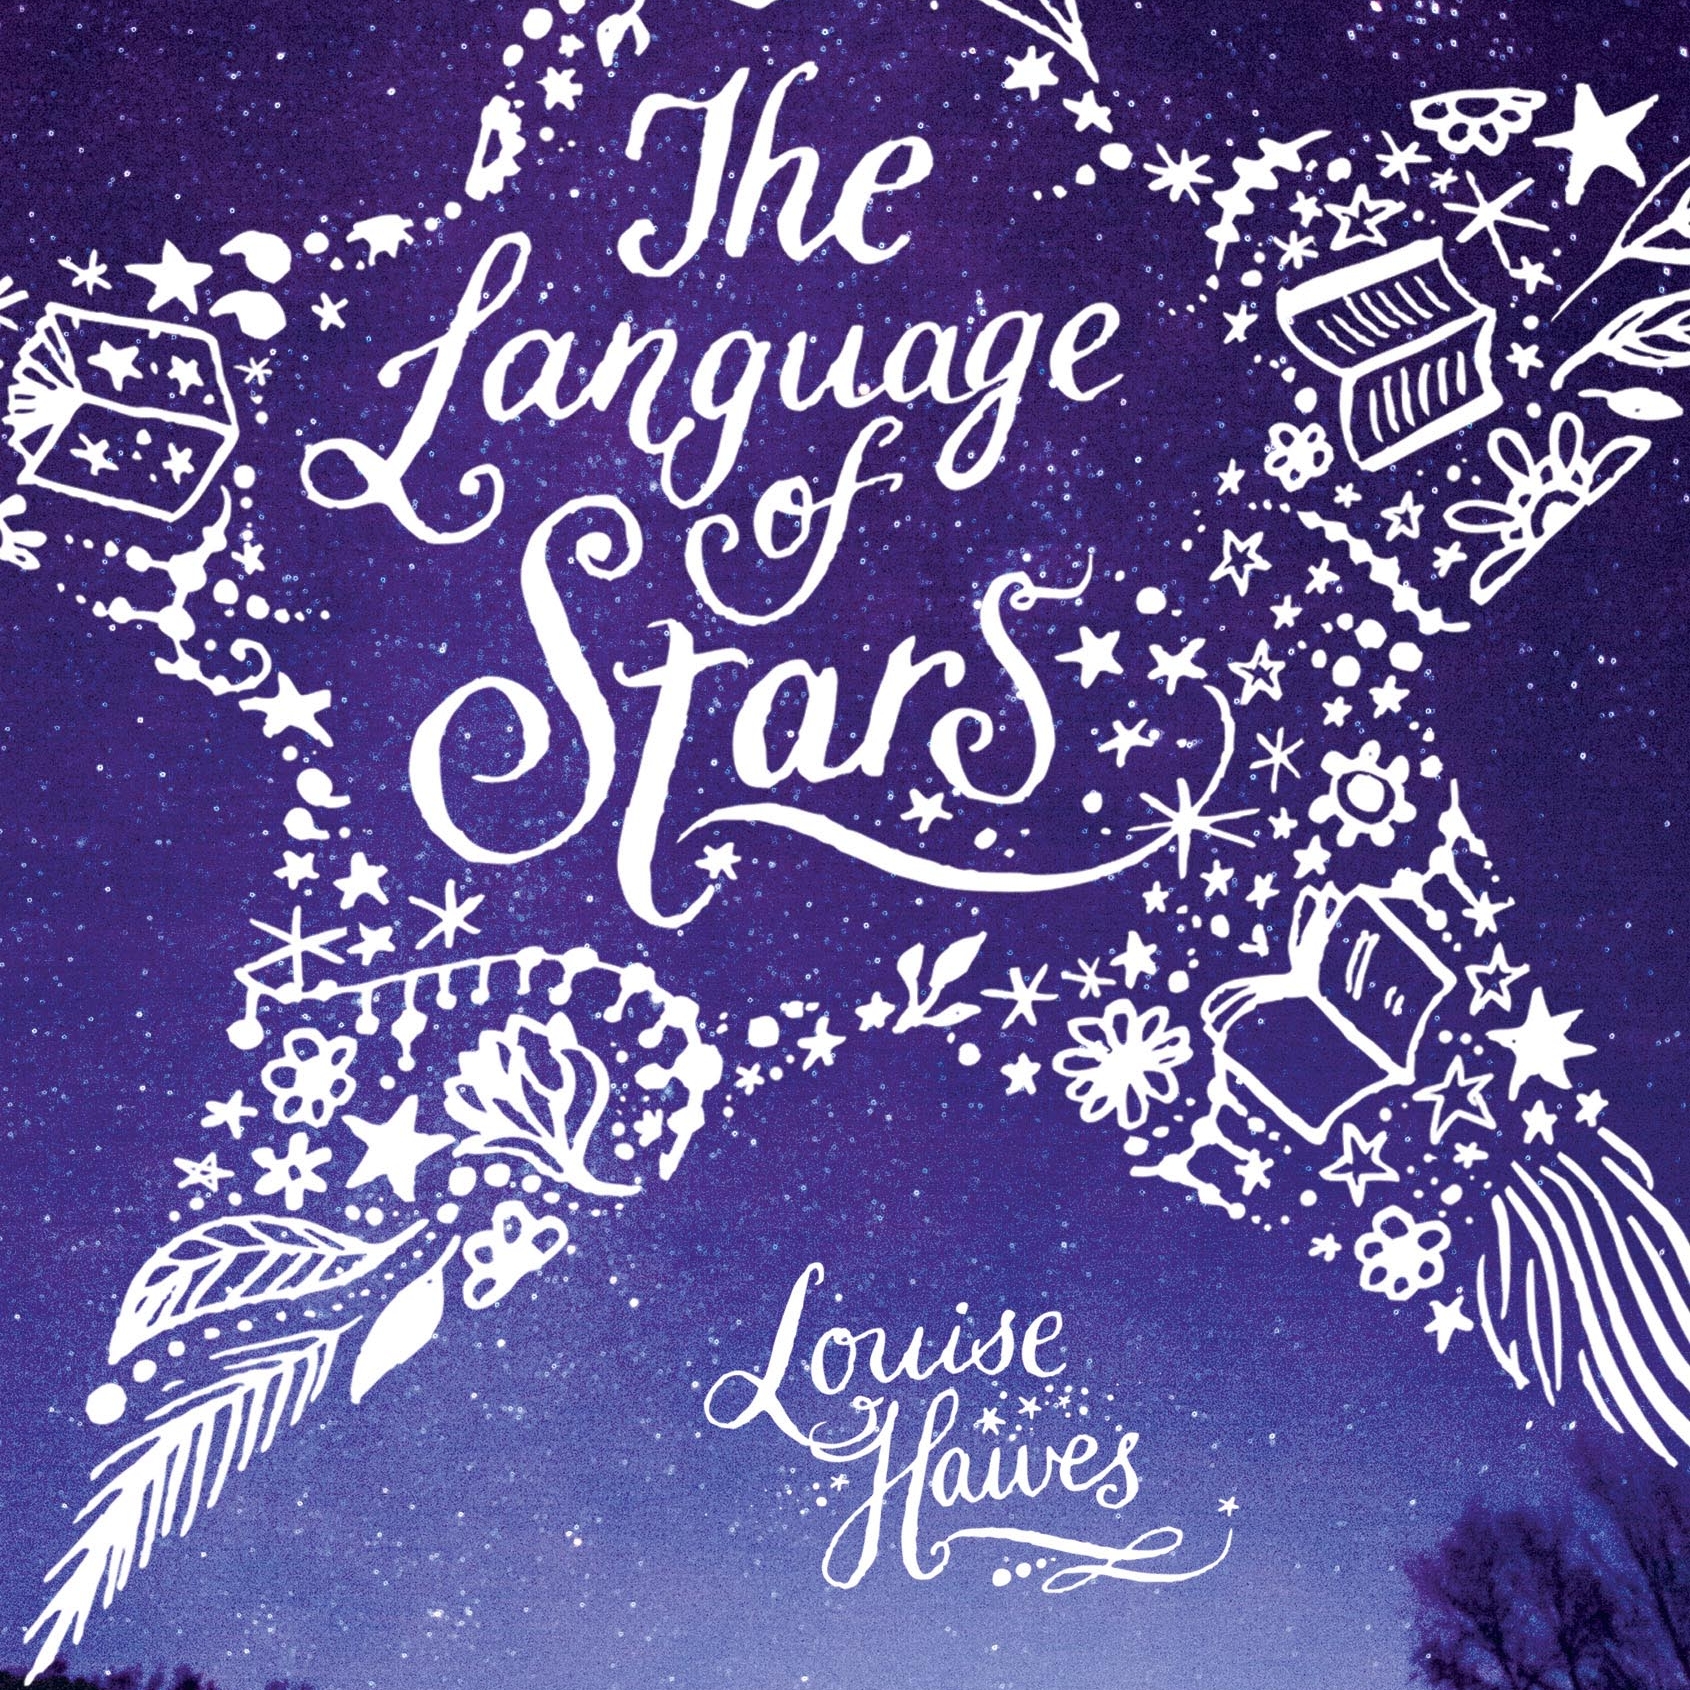 Louise Hawes, The Language of Stars